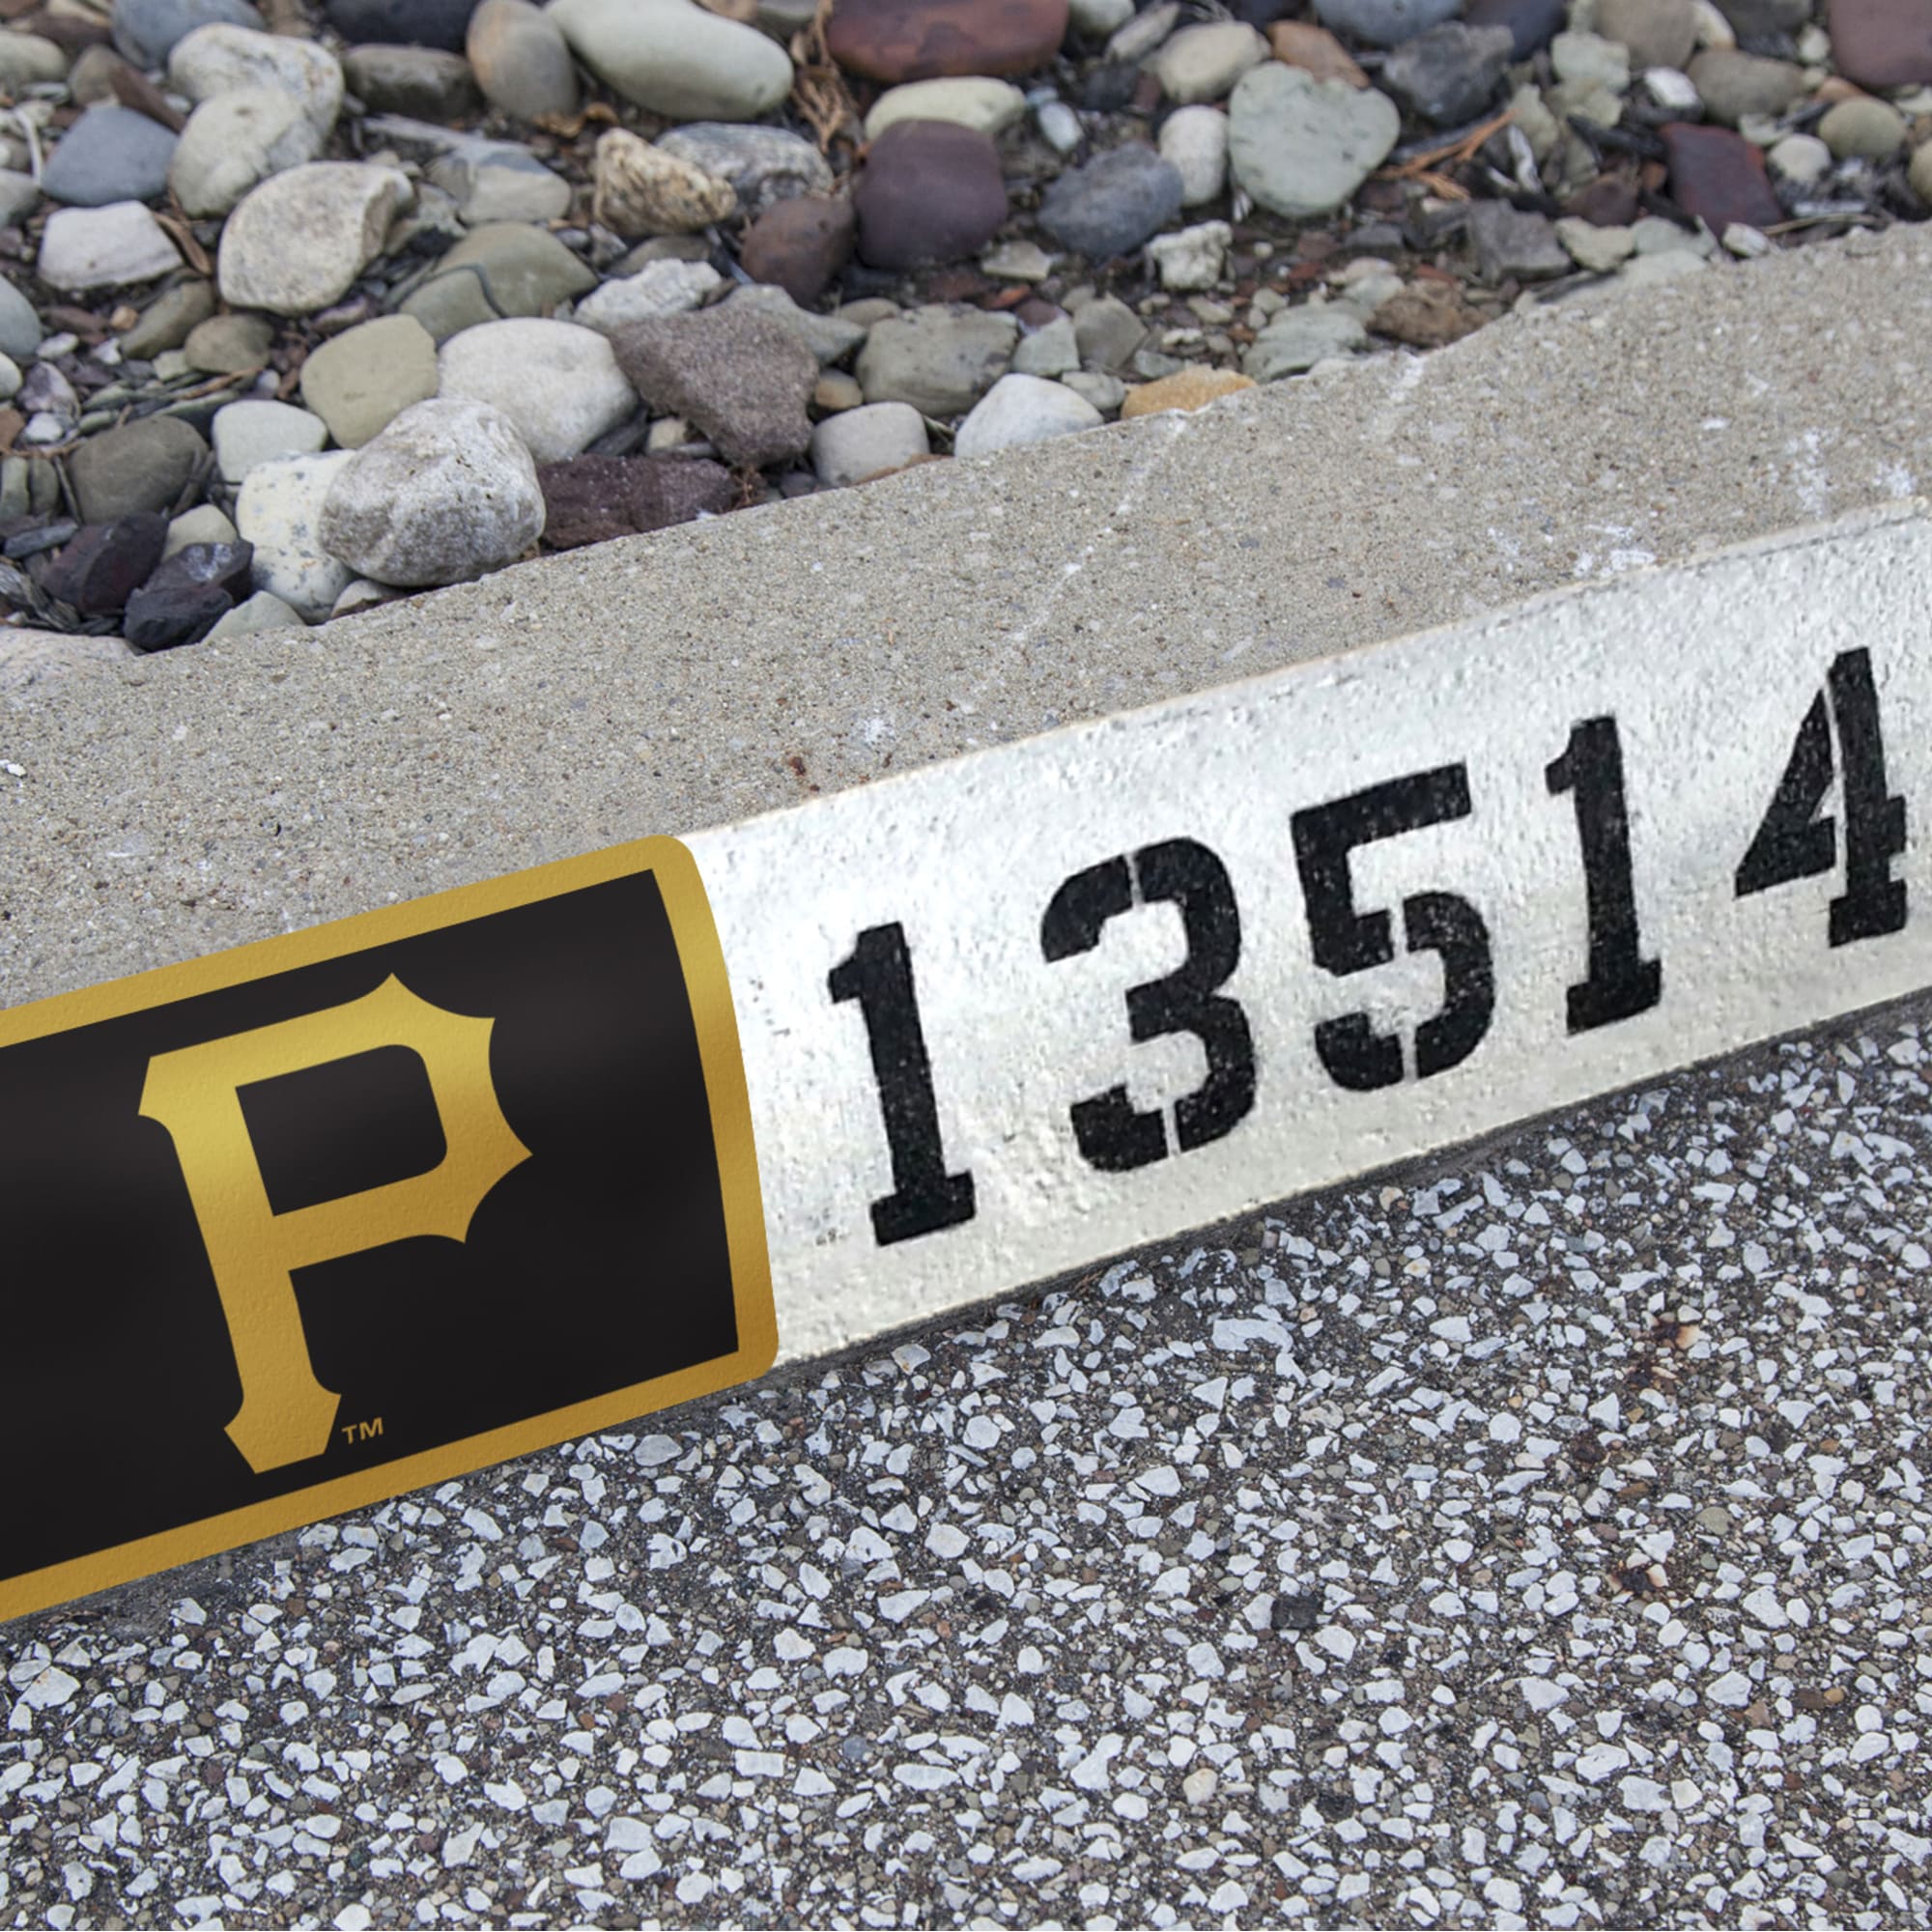 Pittsburgh Pirates: Address Block - Officially Licensed MLB Outdoor Graphic 6.0"W x 8.0"H by Fathead | Wood/Aluminum